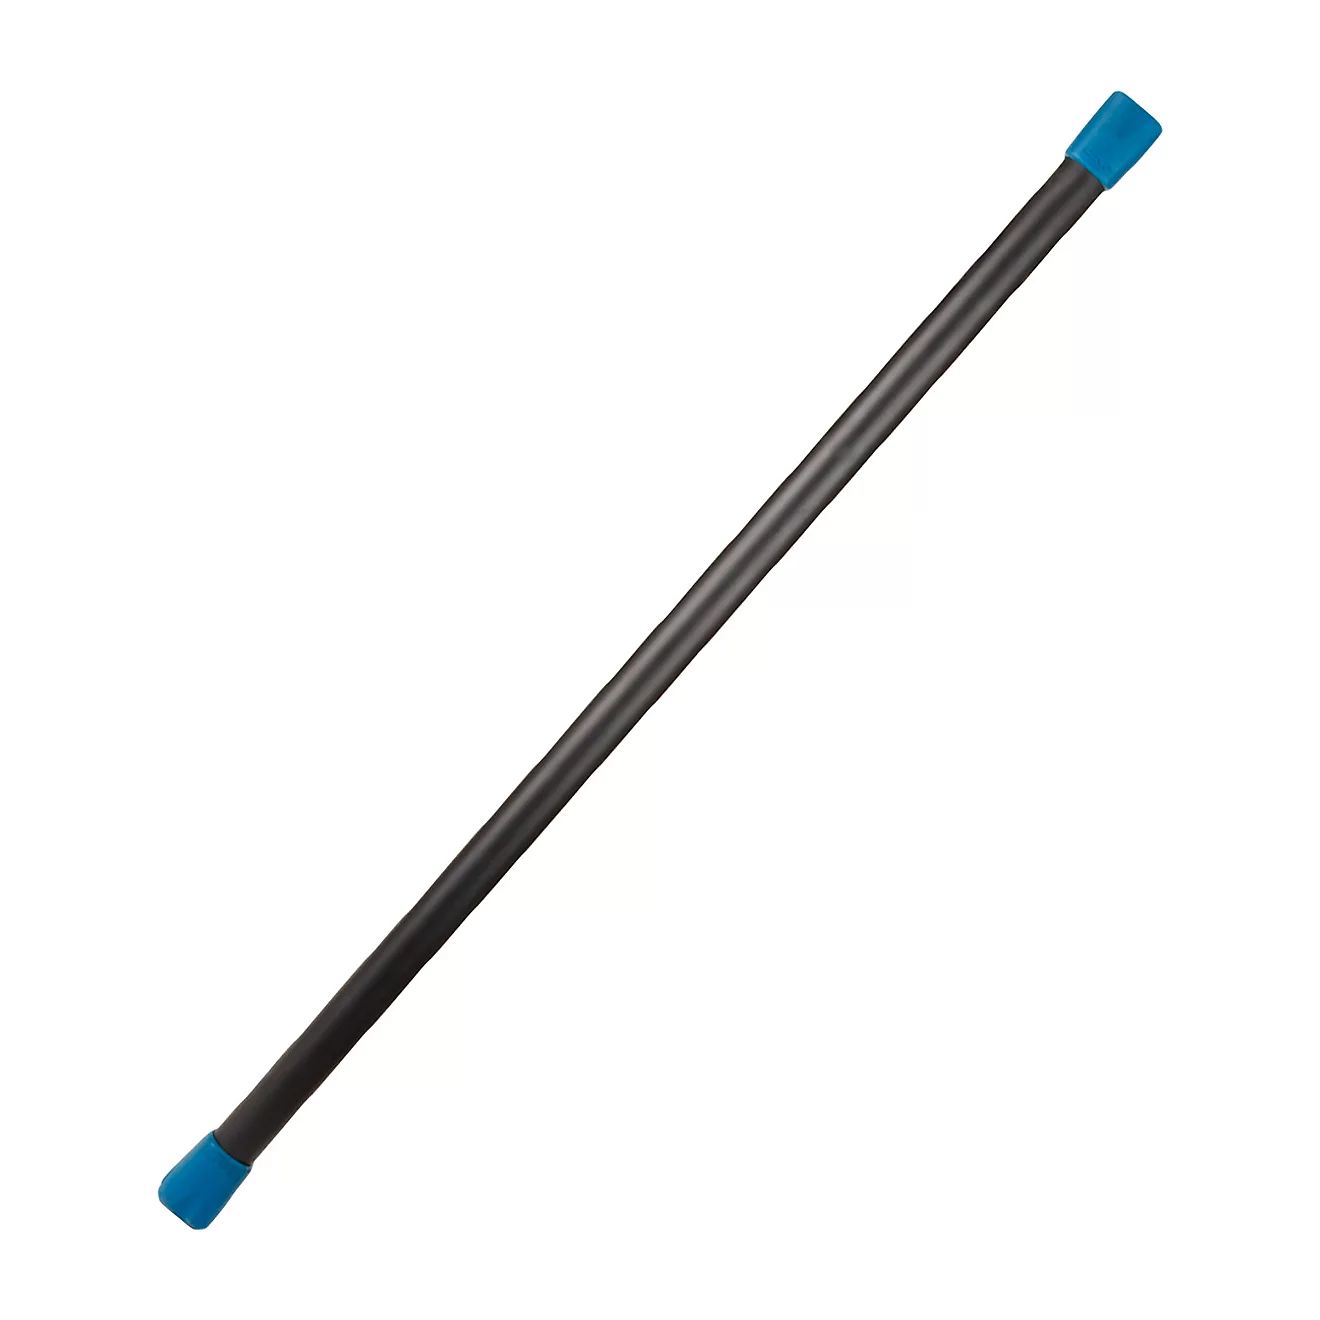 CAP Barbell Definity 12 lb. Workout Bar | Academy Sports + Outdoors